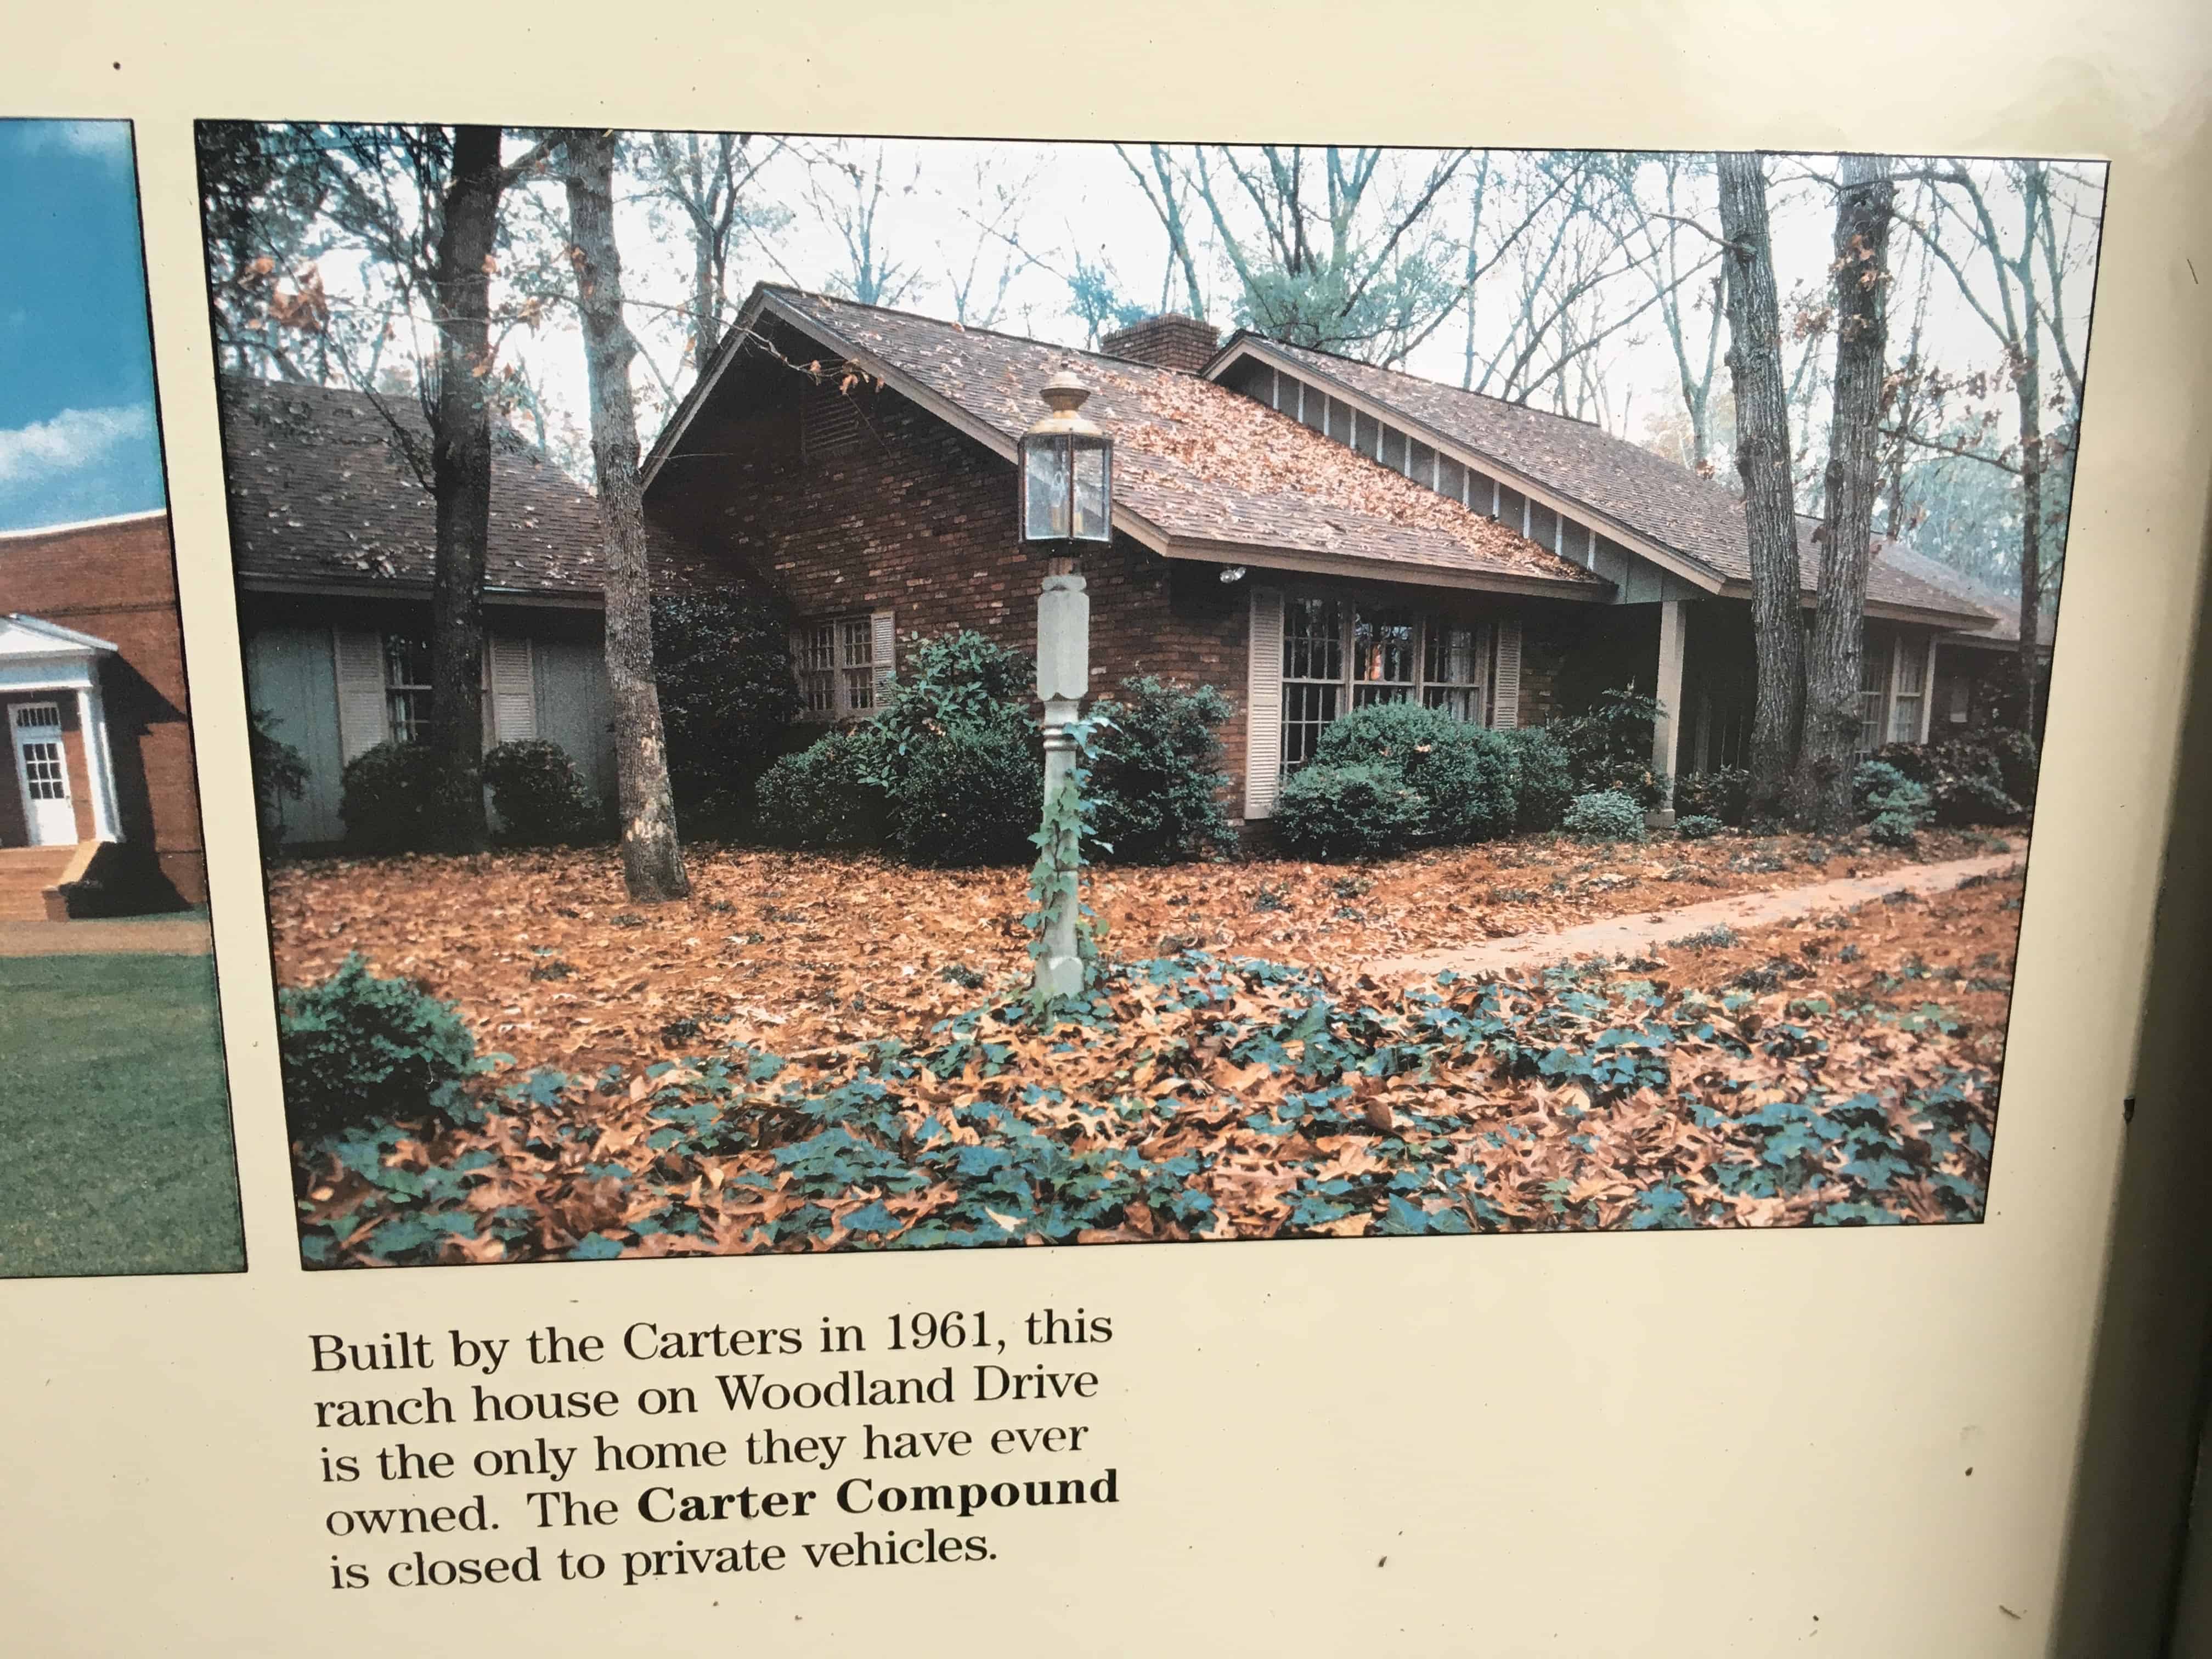 Photo of the Carter Compound in Plains, Georgia